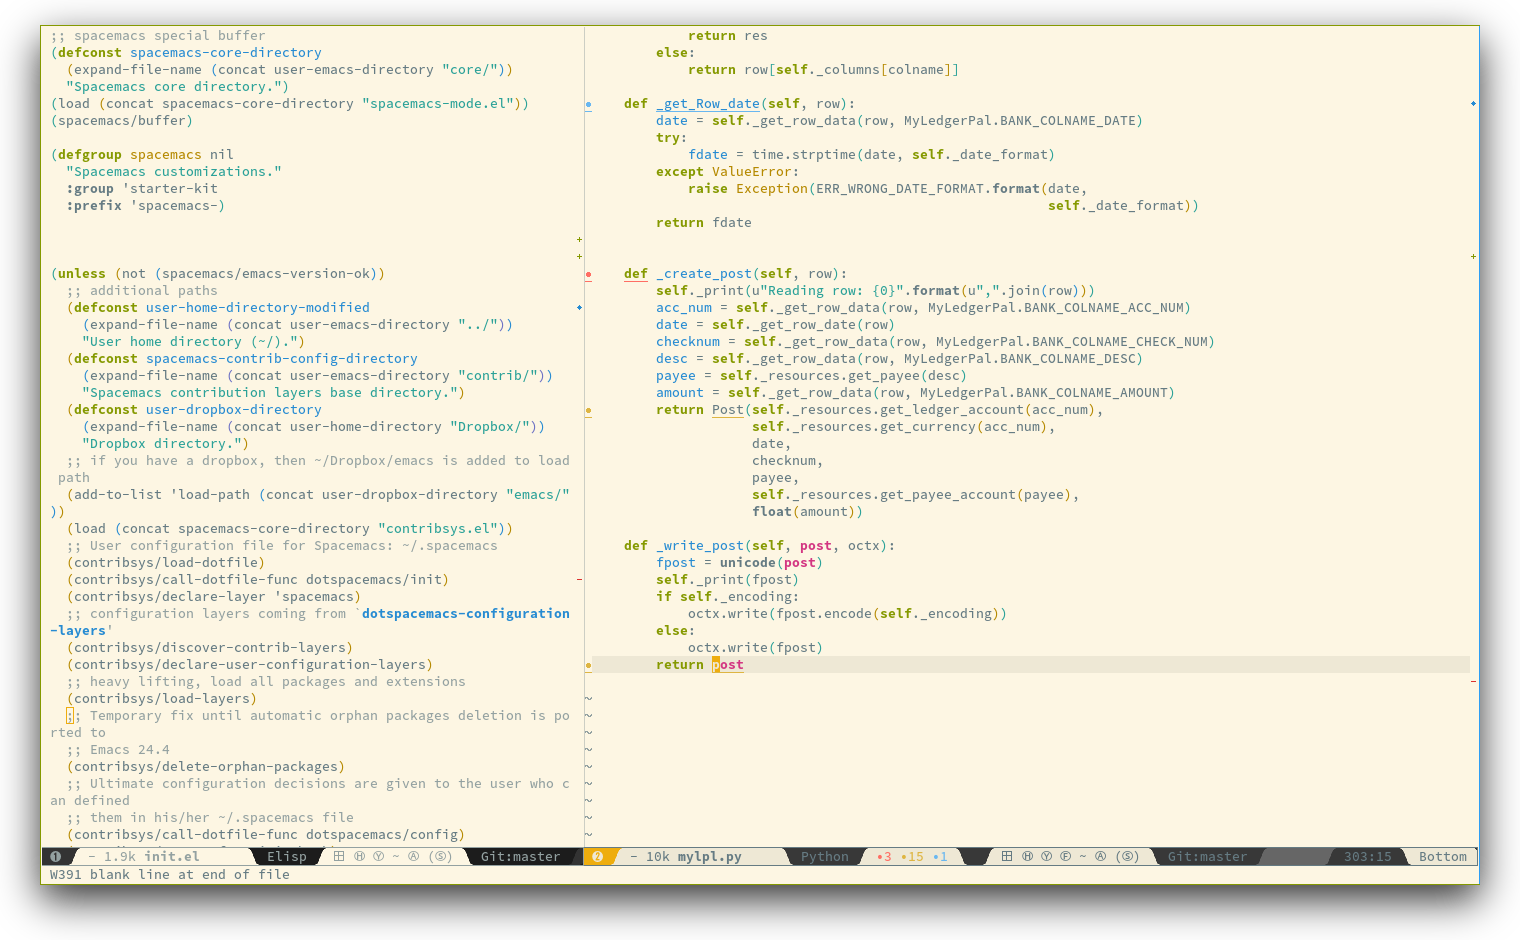 /TakeV/spacemacs/media/commit/7274d9d5c2924fffe1334be14a6daf099c332c81/doc/img/spacemacs-python.png